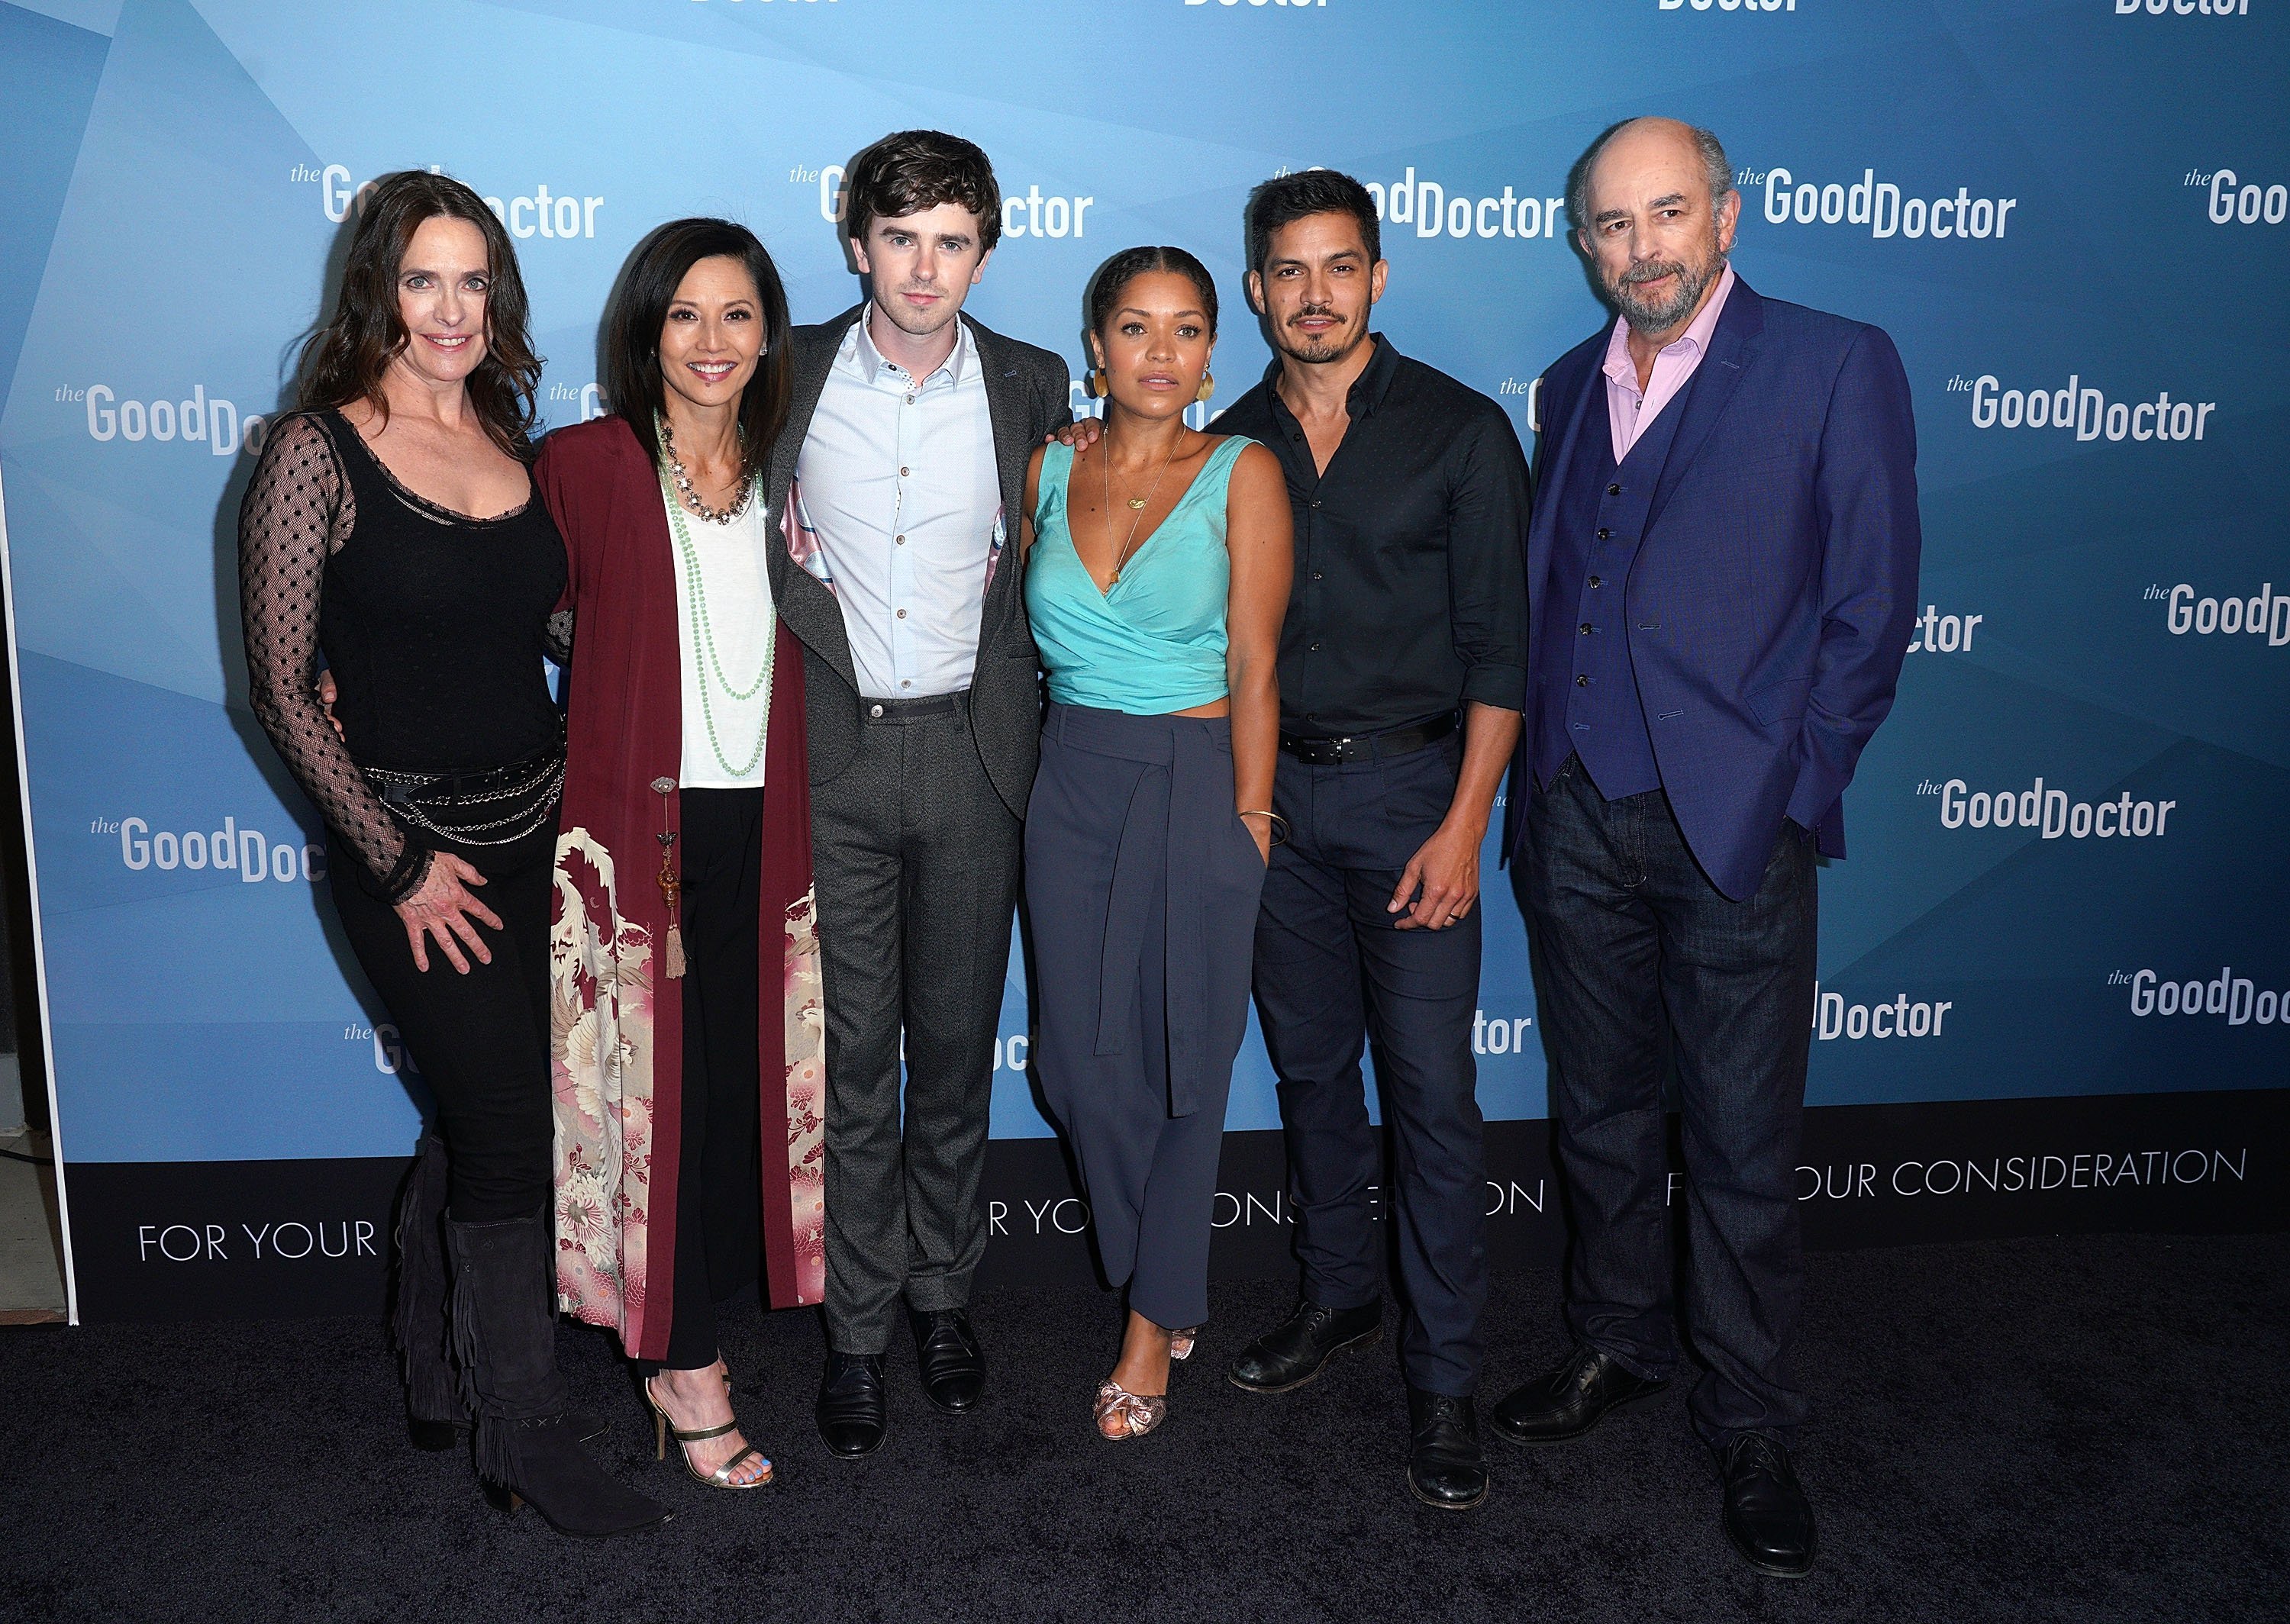 The cast of "The Good Doctor" attend the For Your Consideration Event in Culver City, California on May 22, 2018 | Photo: Getty Images